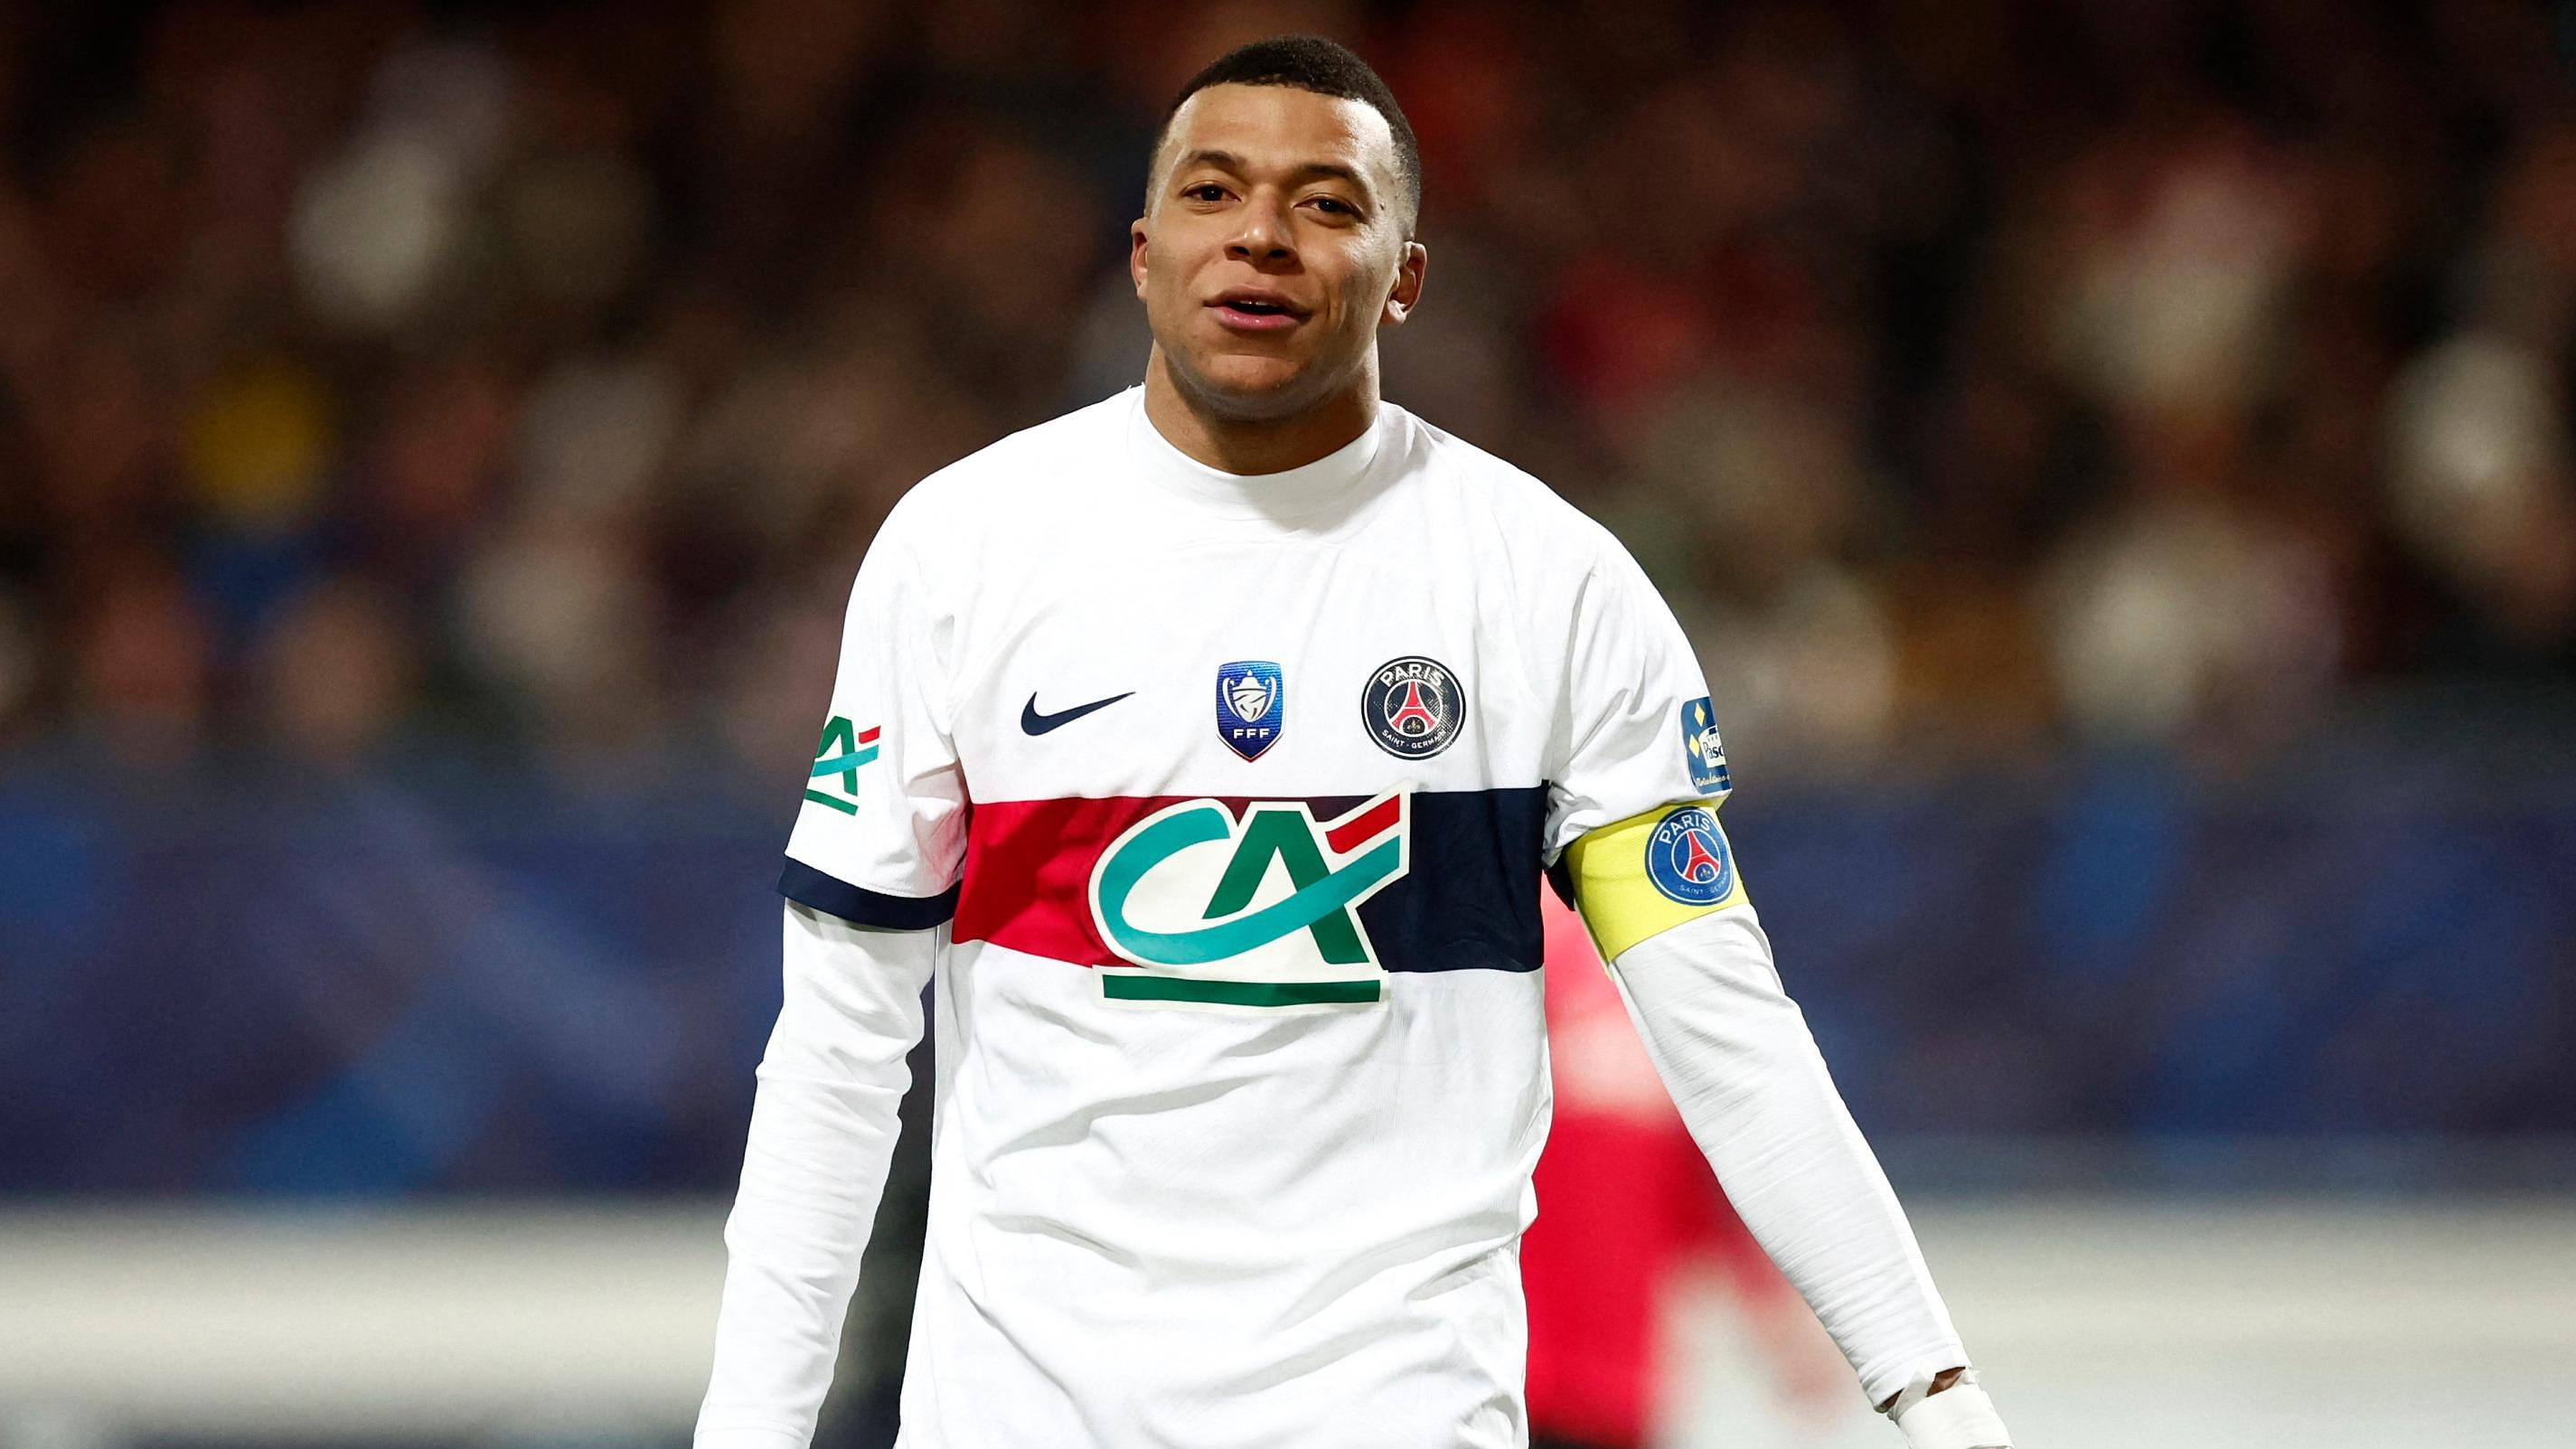 Football: Florentino Perez makes another appeal to Kylian Mbappé